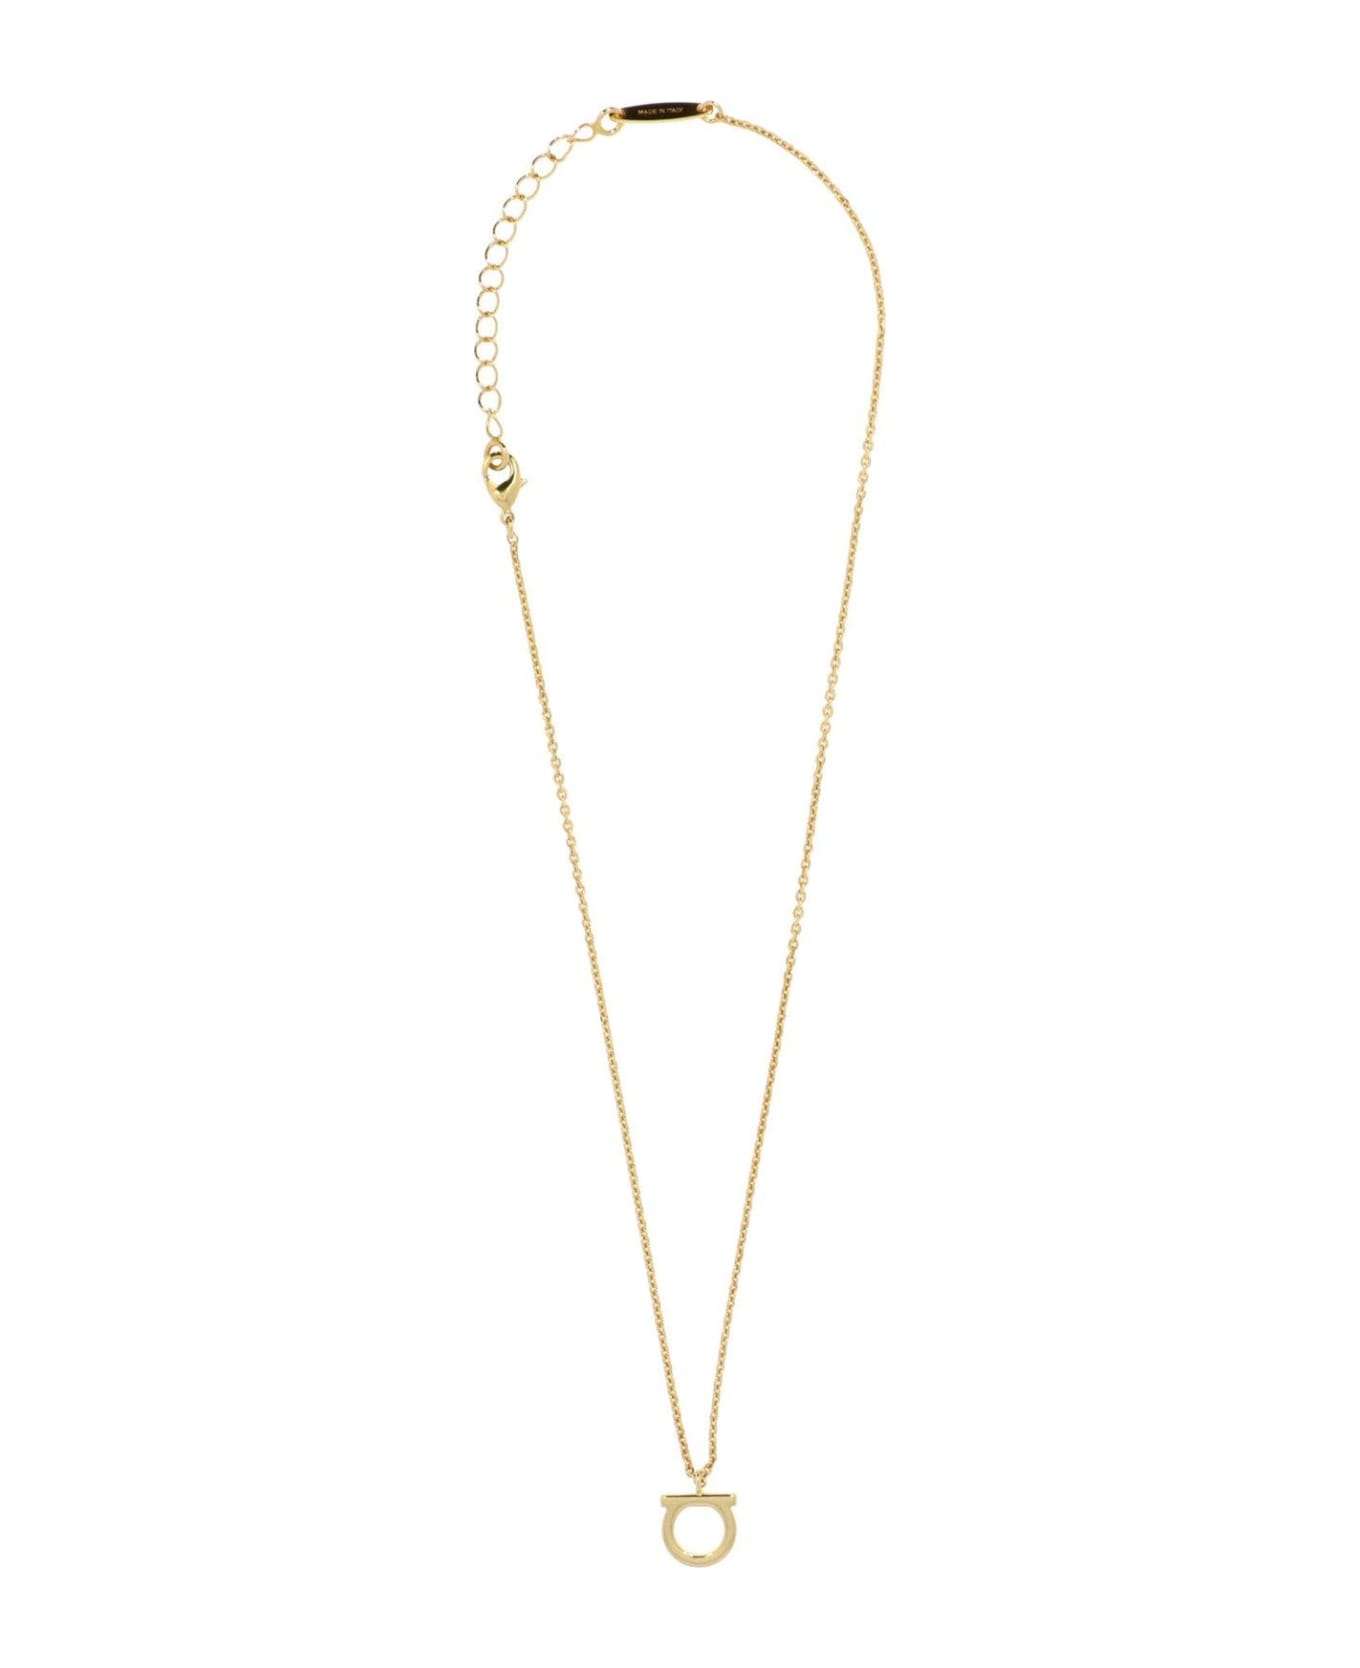 Ferragamo Gancini Chained Necklace - Golden ネックレス